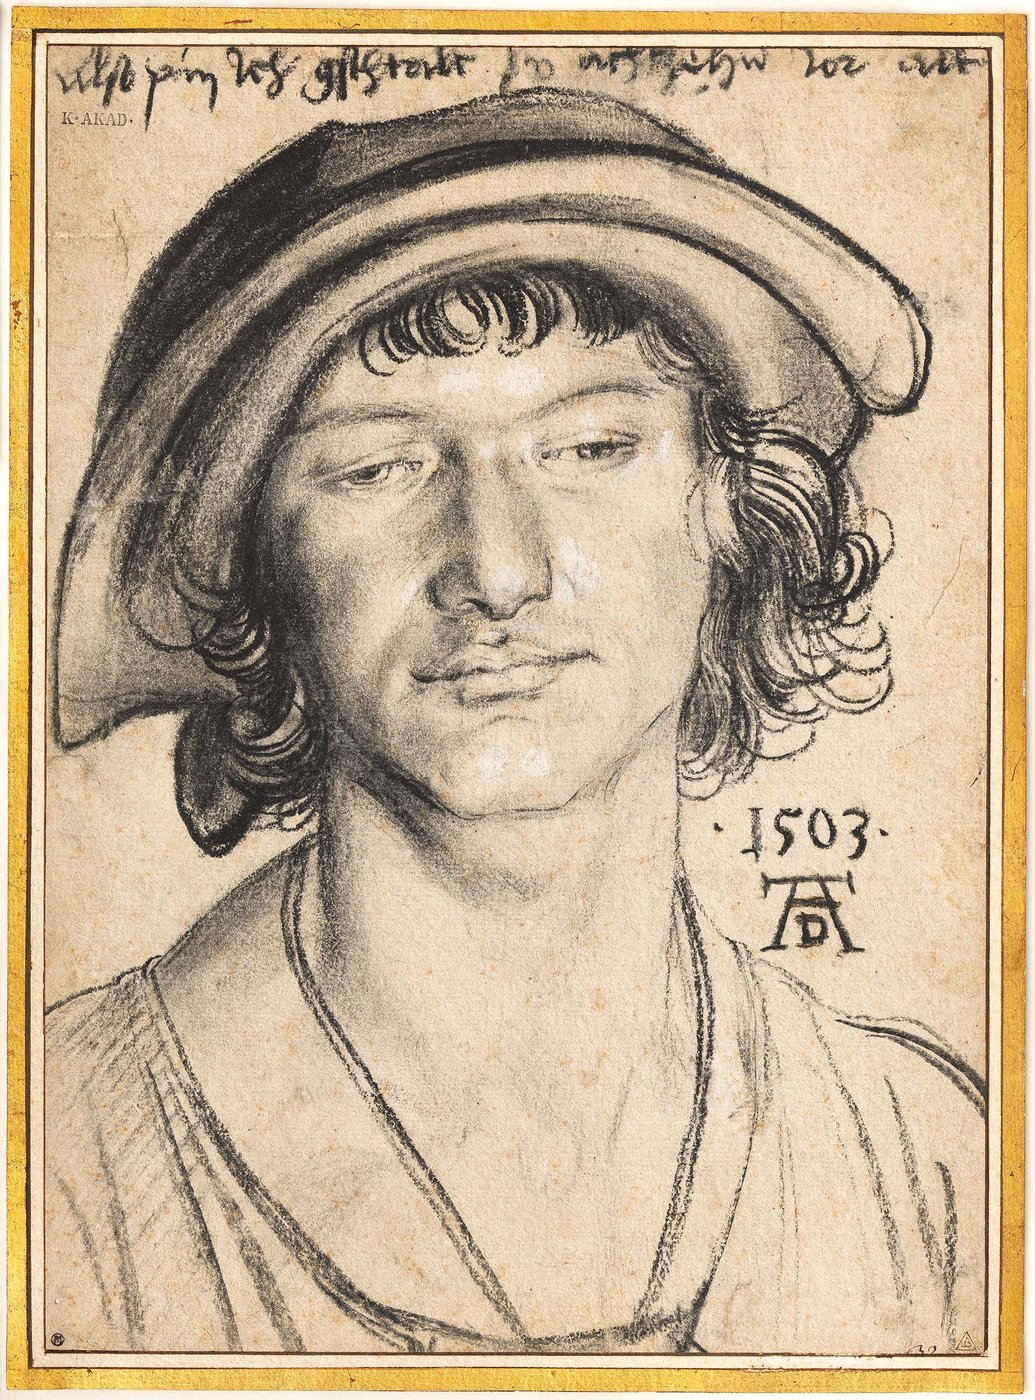 Portrait of a young man with wavy hair, headdress and lowered gaze.